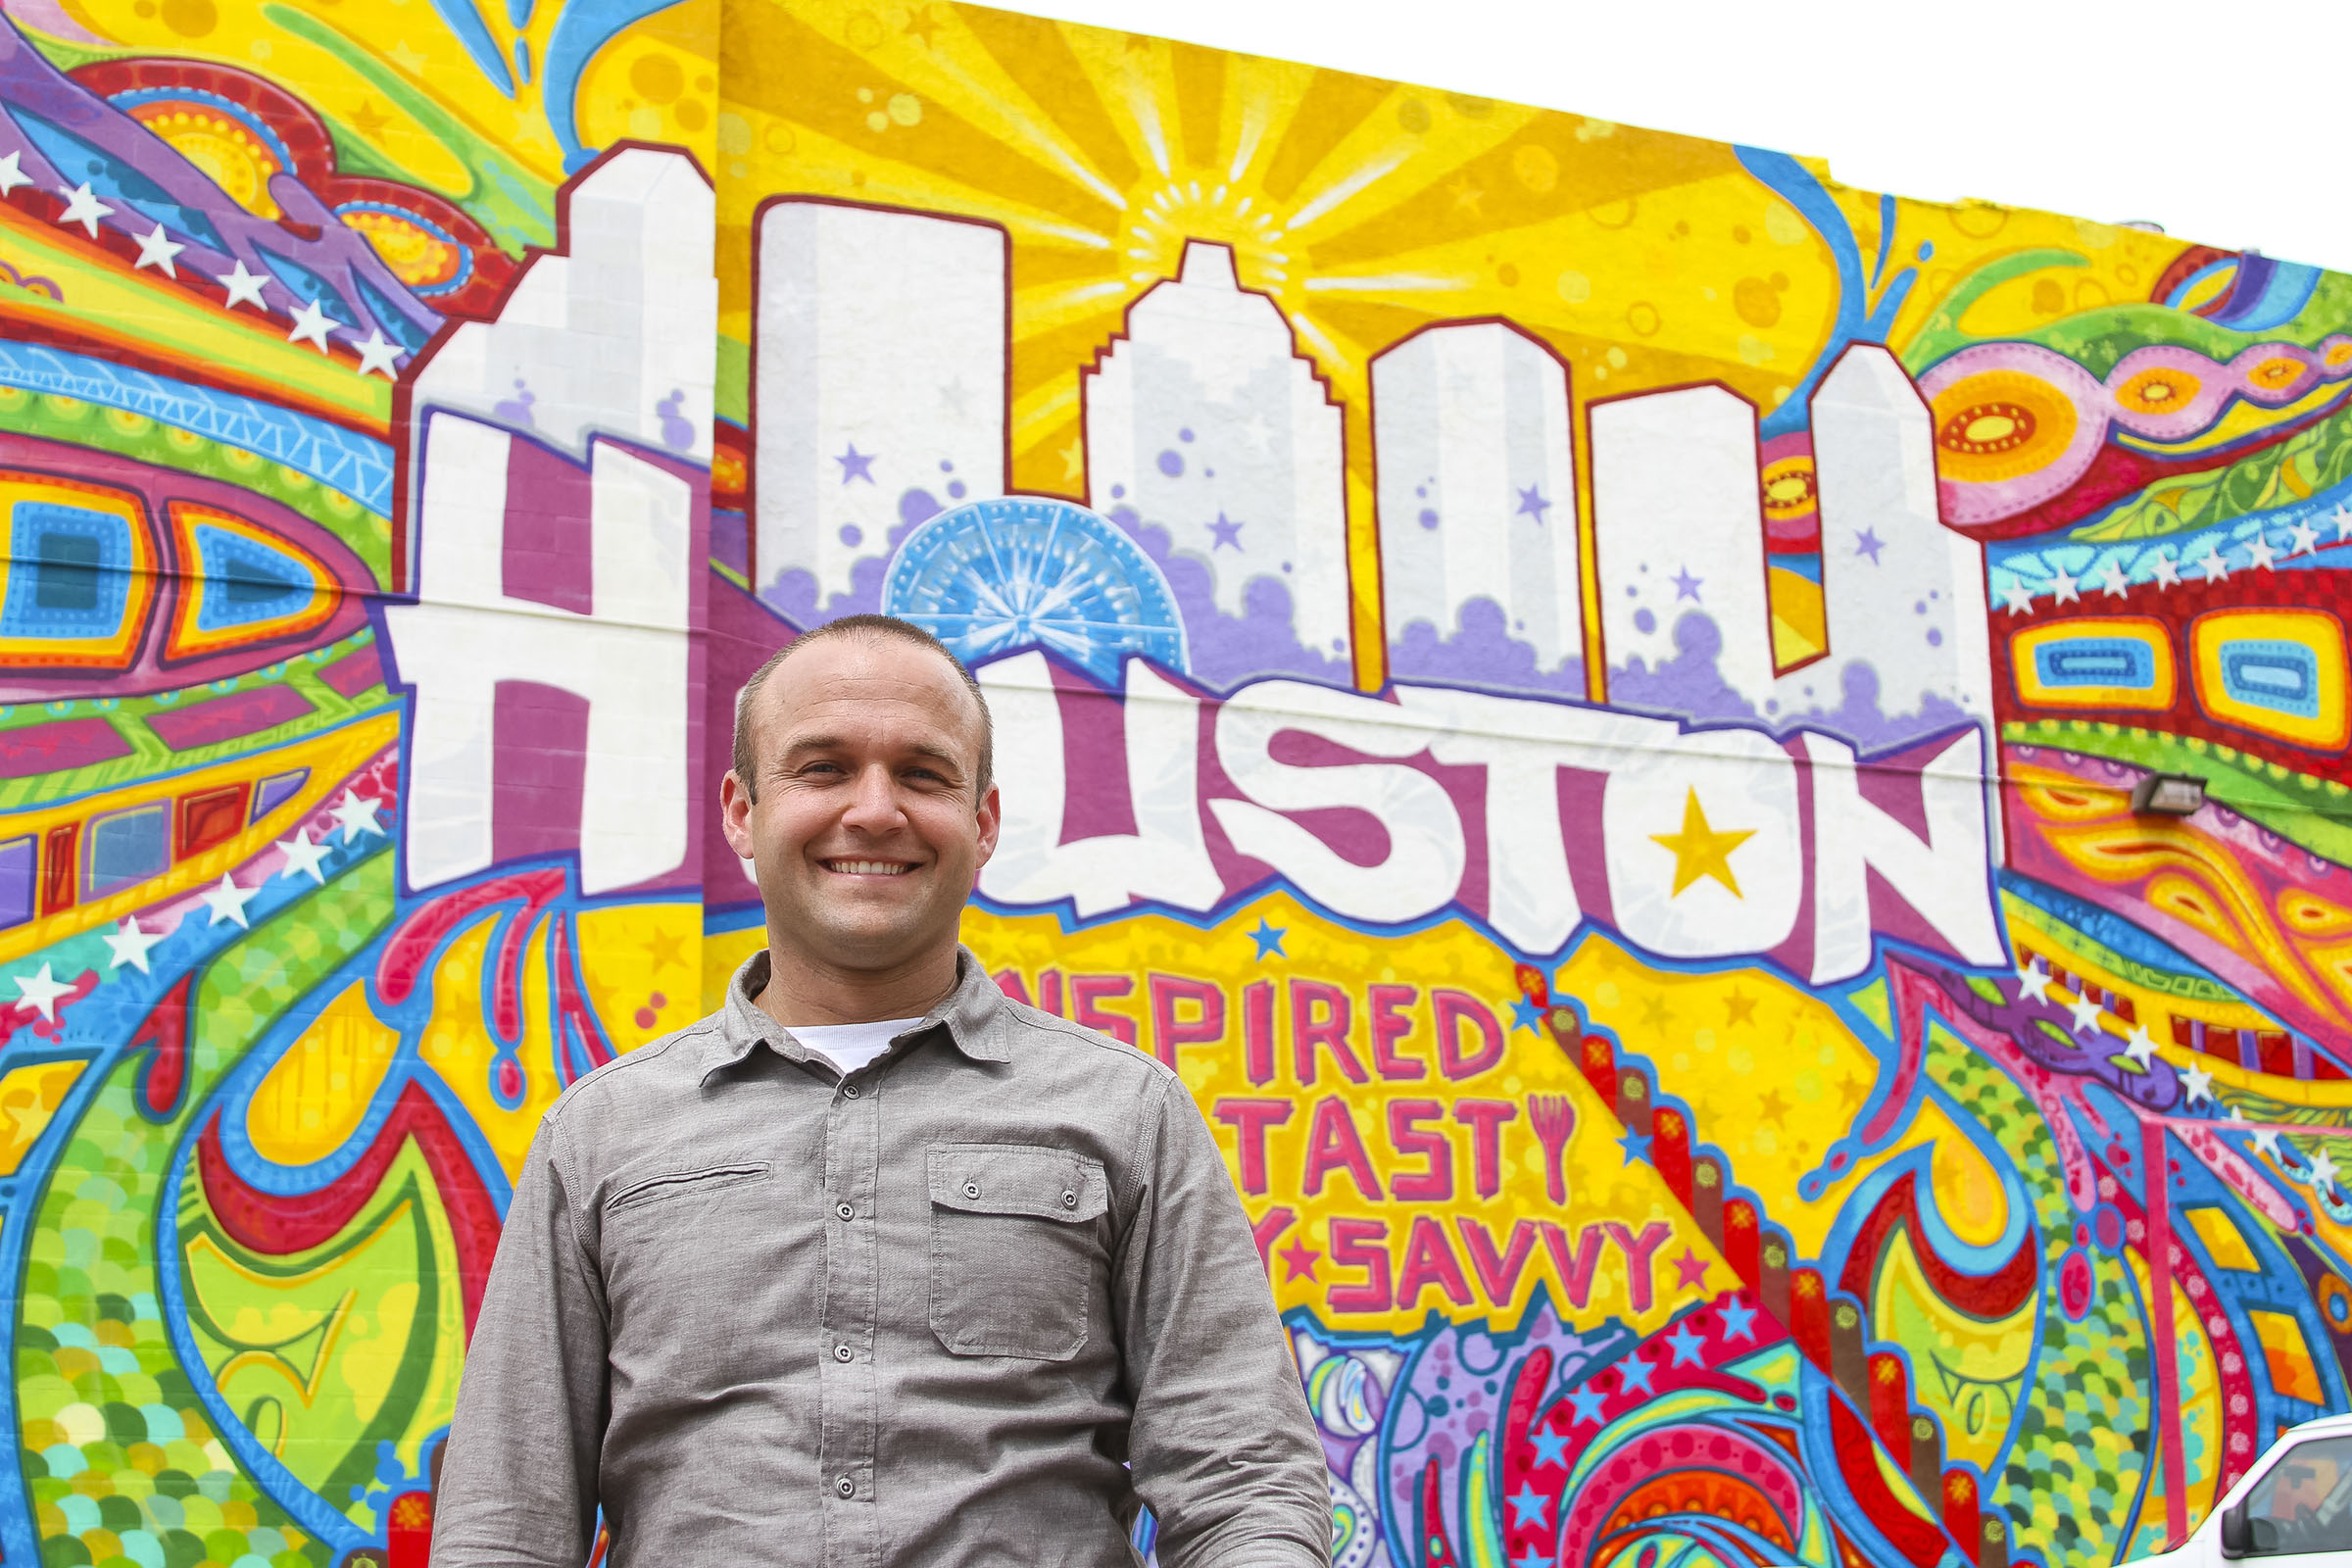 Chet Garner stands in front of a mural that says Houston Texas